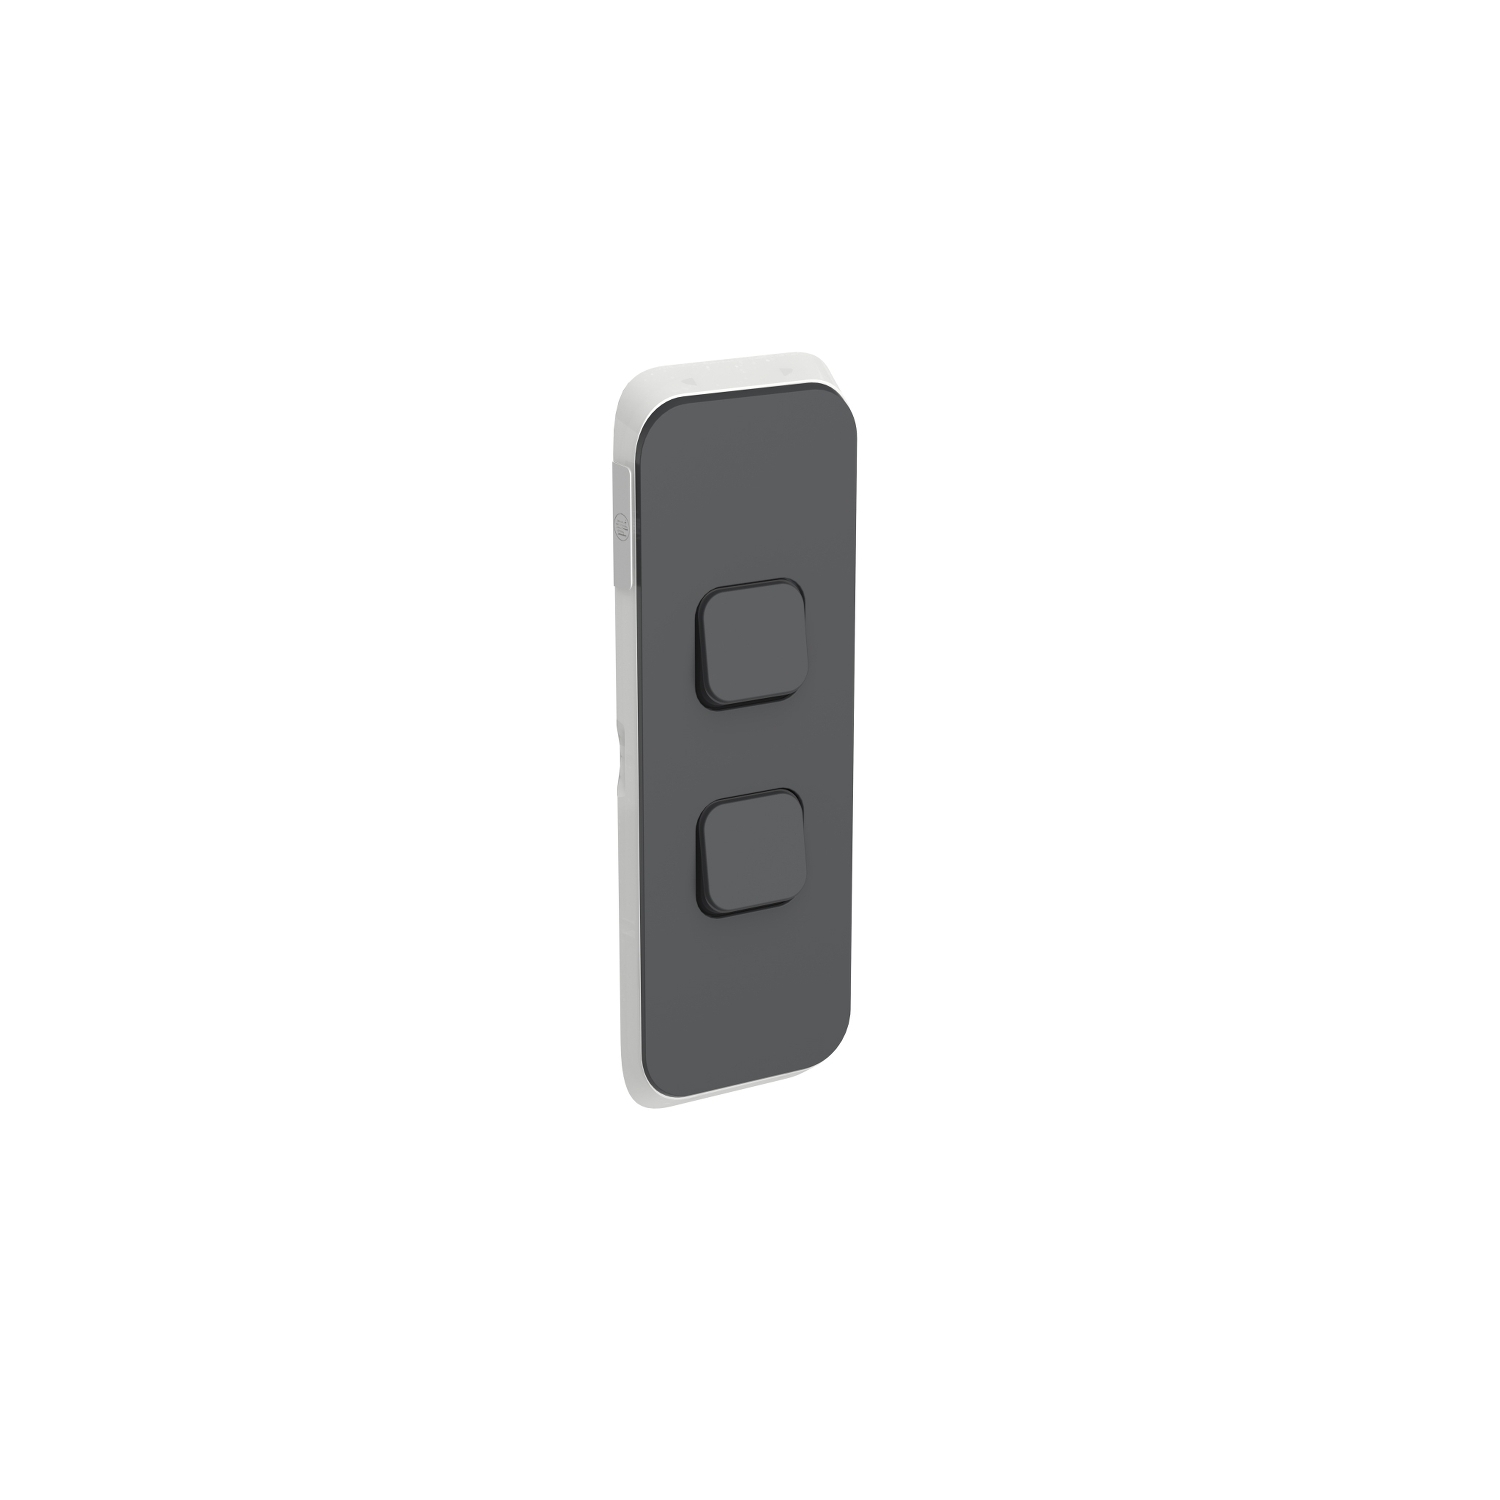 PDL362C-AN - PDL Iconic Cover Plate Switch Architrave 2Gang - Anthracite